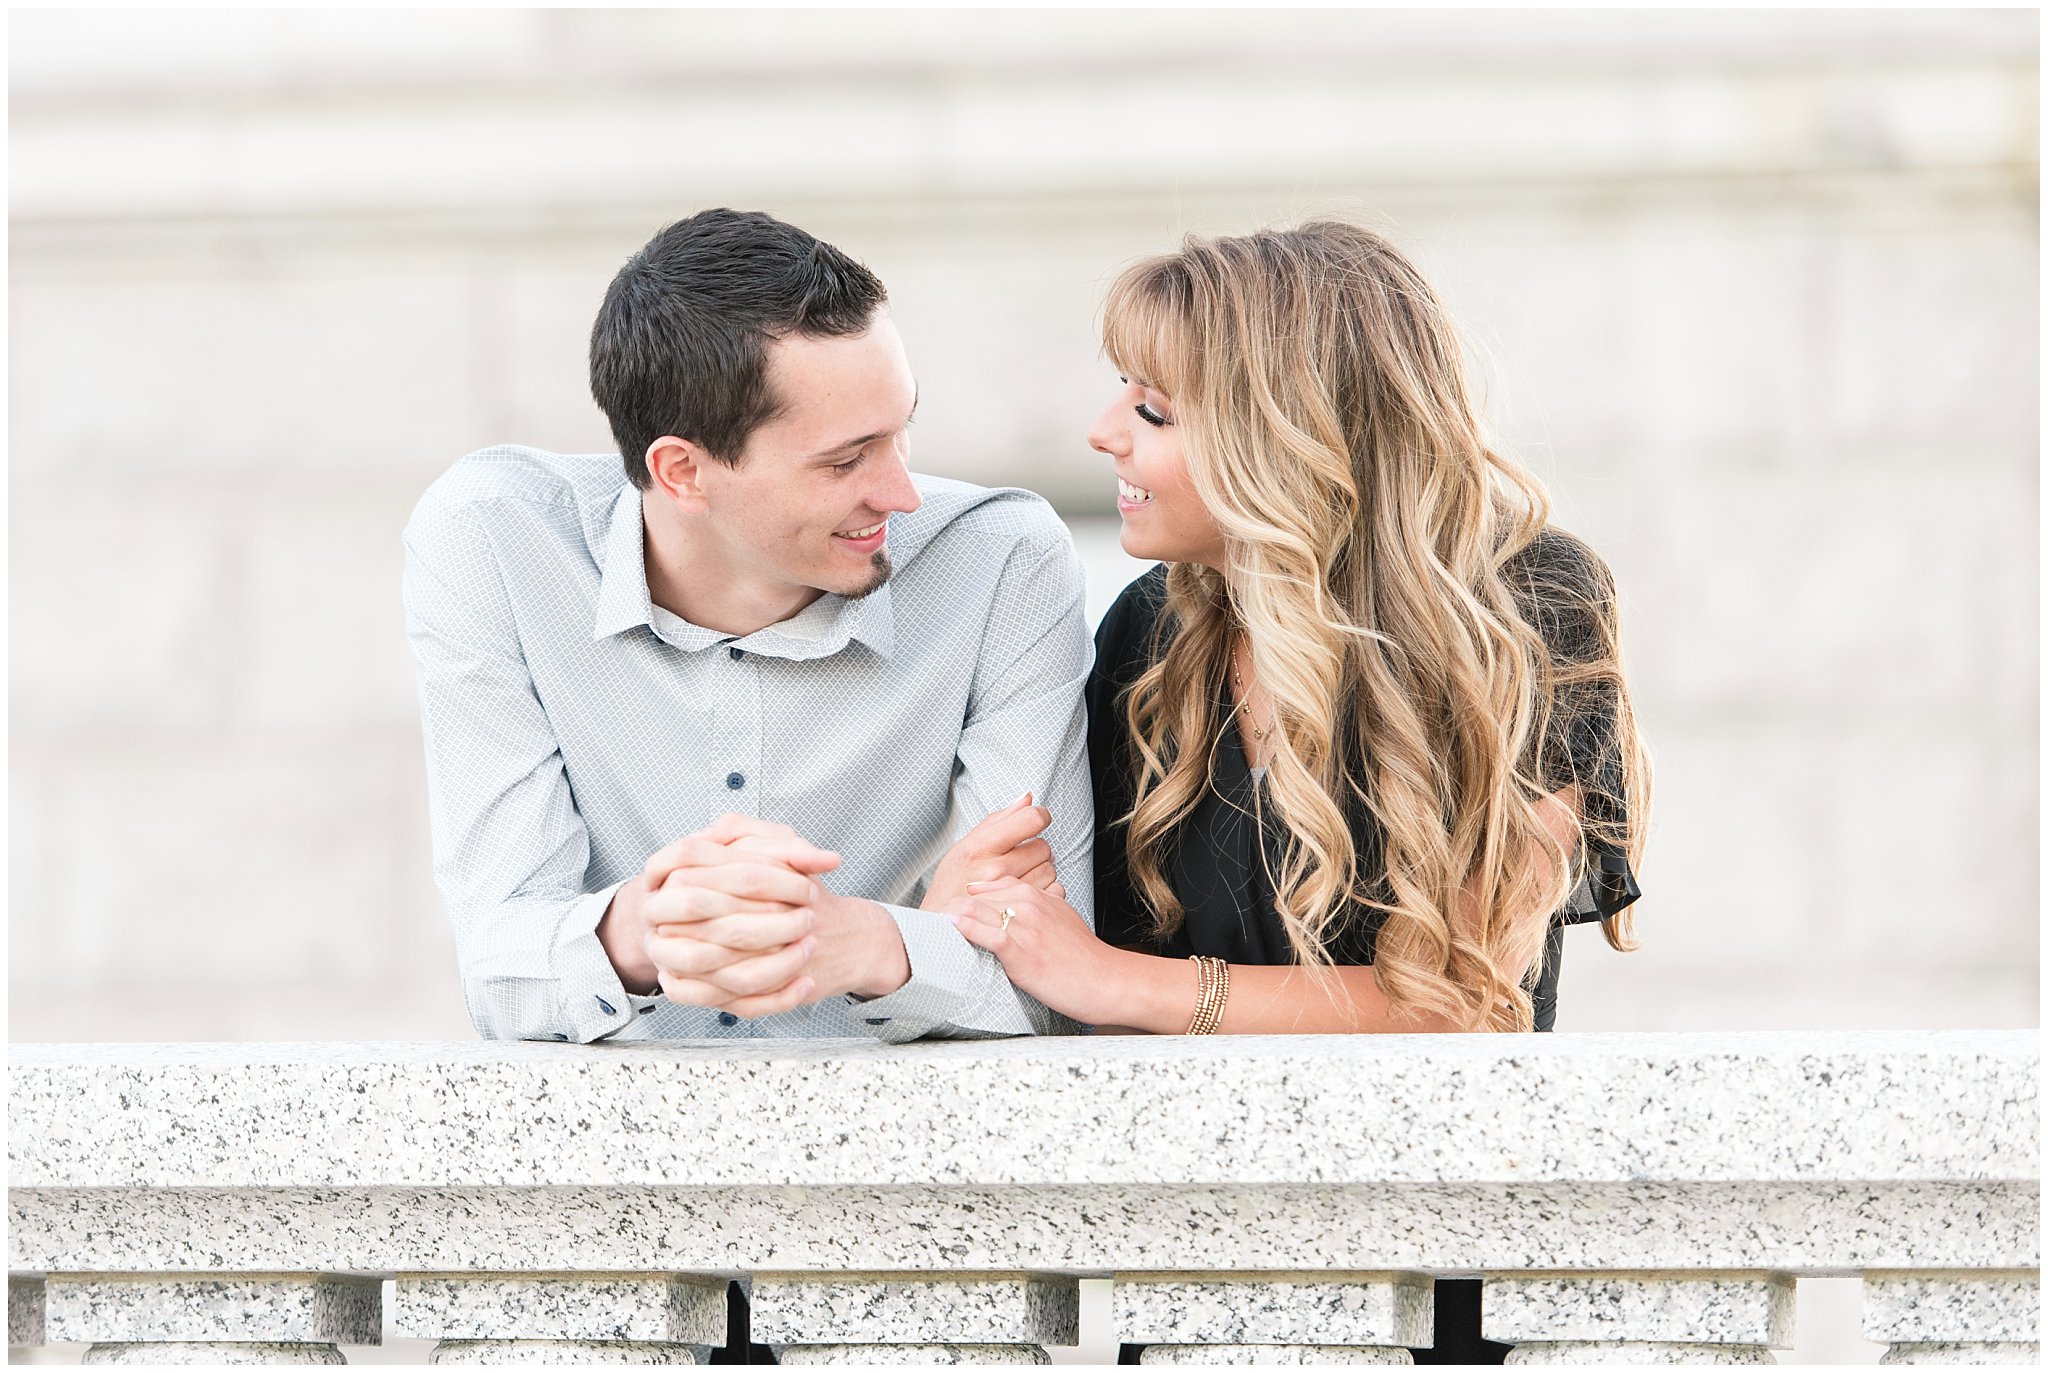 Couple in black dress and grey button up shirt at the Utah State Capitol | Utah State Capitol and Tunnel Springs Engagement Session | Jessie and Dallin Photography